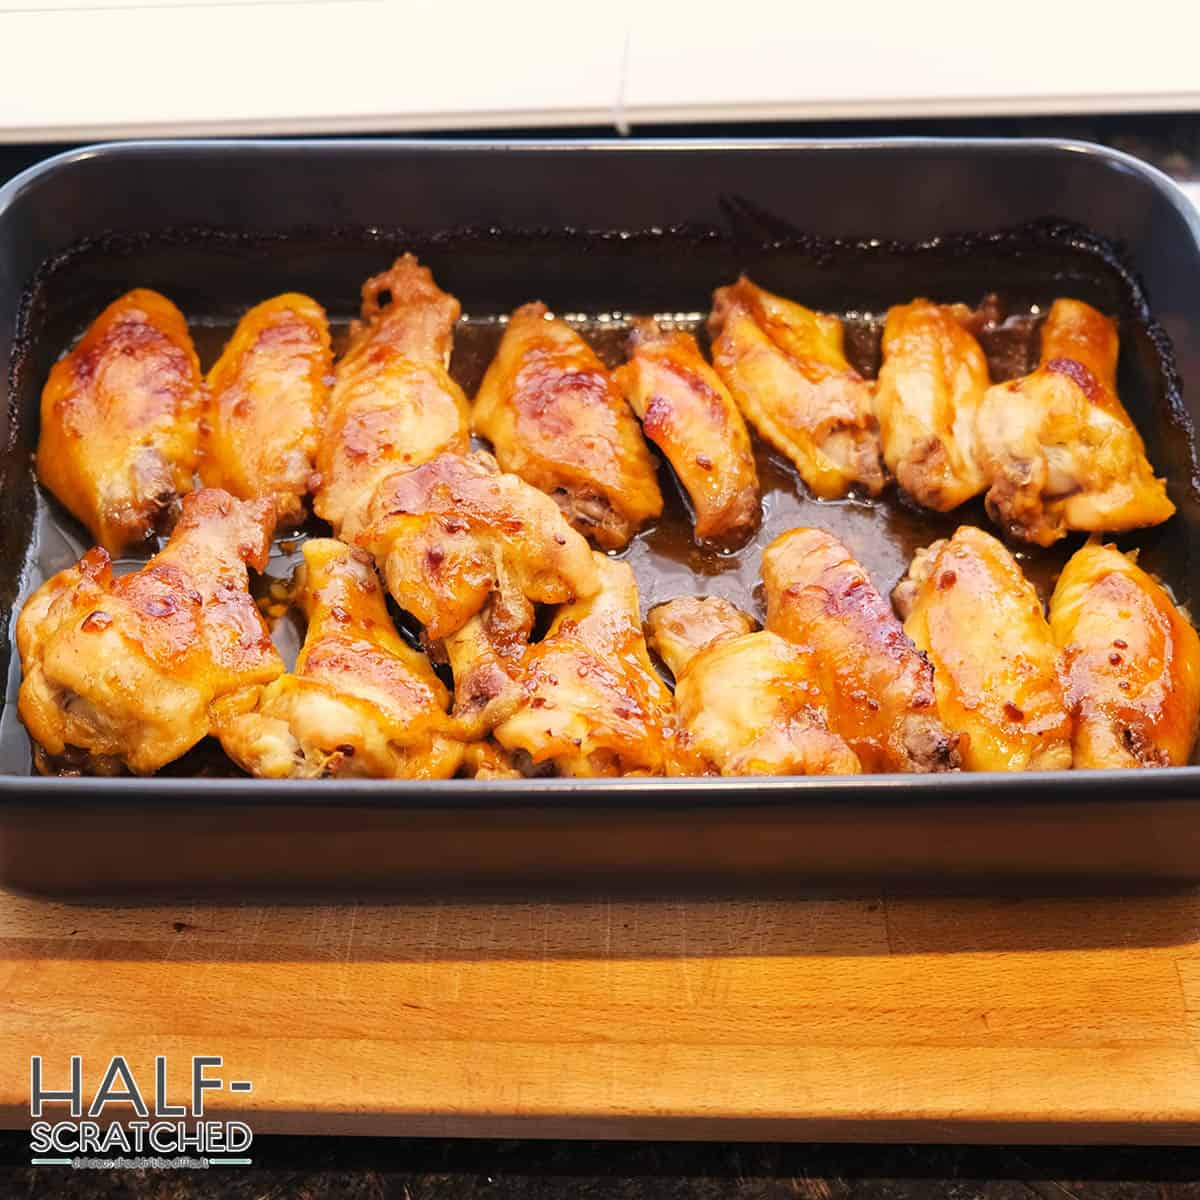 Chicken wings on a baking tray